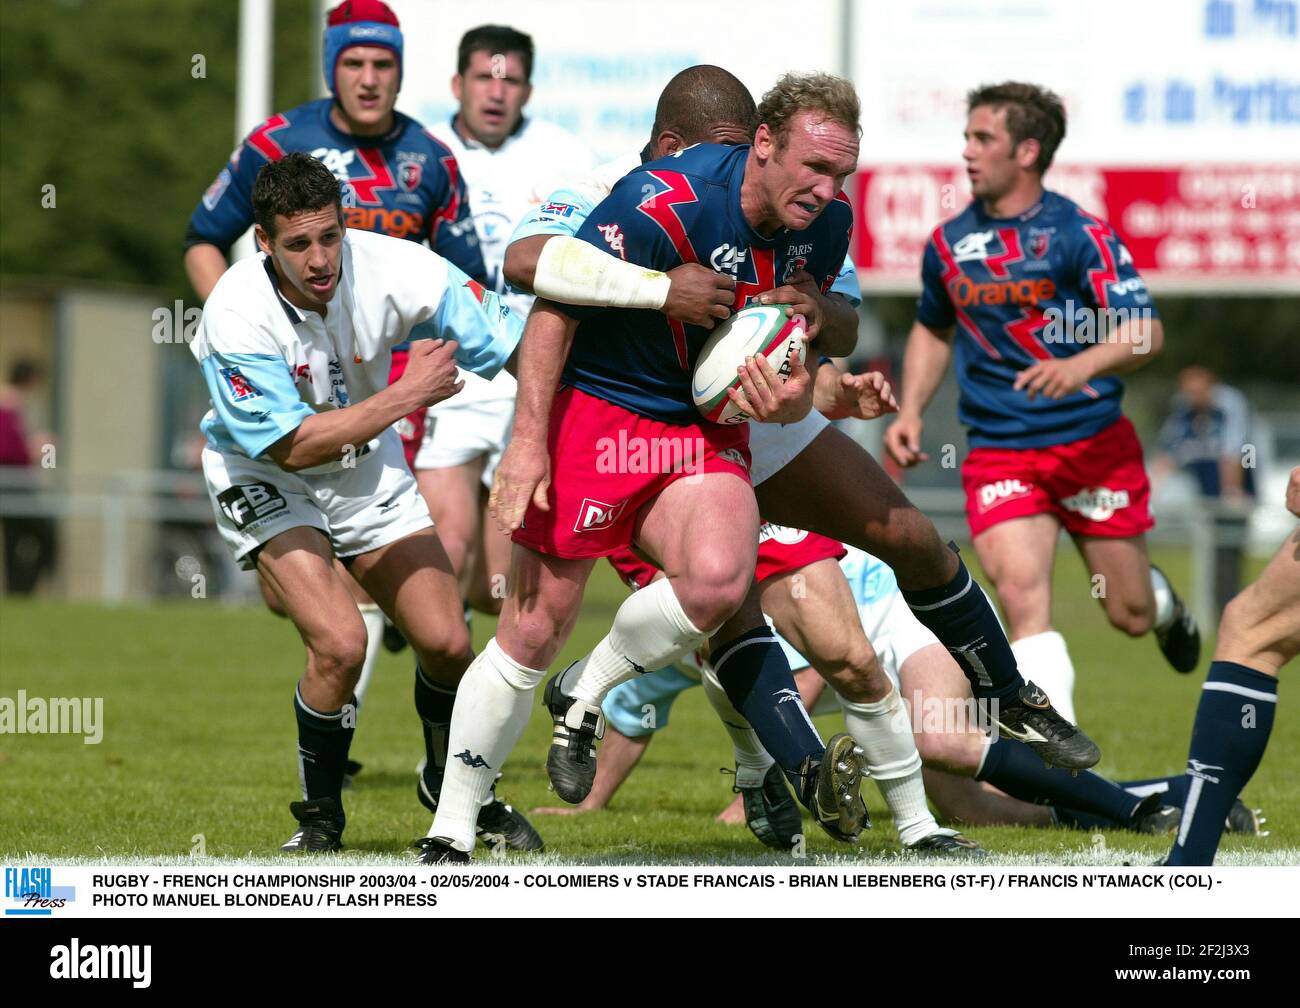 RUGBY - FRENCH CHAMPIONSHIP 2003/04 - 02/05/2004 - COLOMIERS v STADE FRANCAIS - BRIAN LIEBENBERG (ST-F) / FRANCIS N'TAMACK (COL) - PHOTO MANUEL BLONDEAU / FLASH PRESS Stock Photo